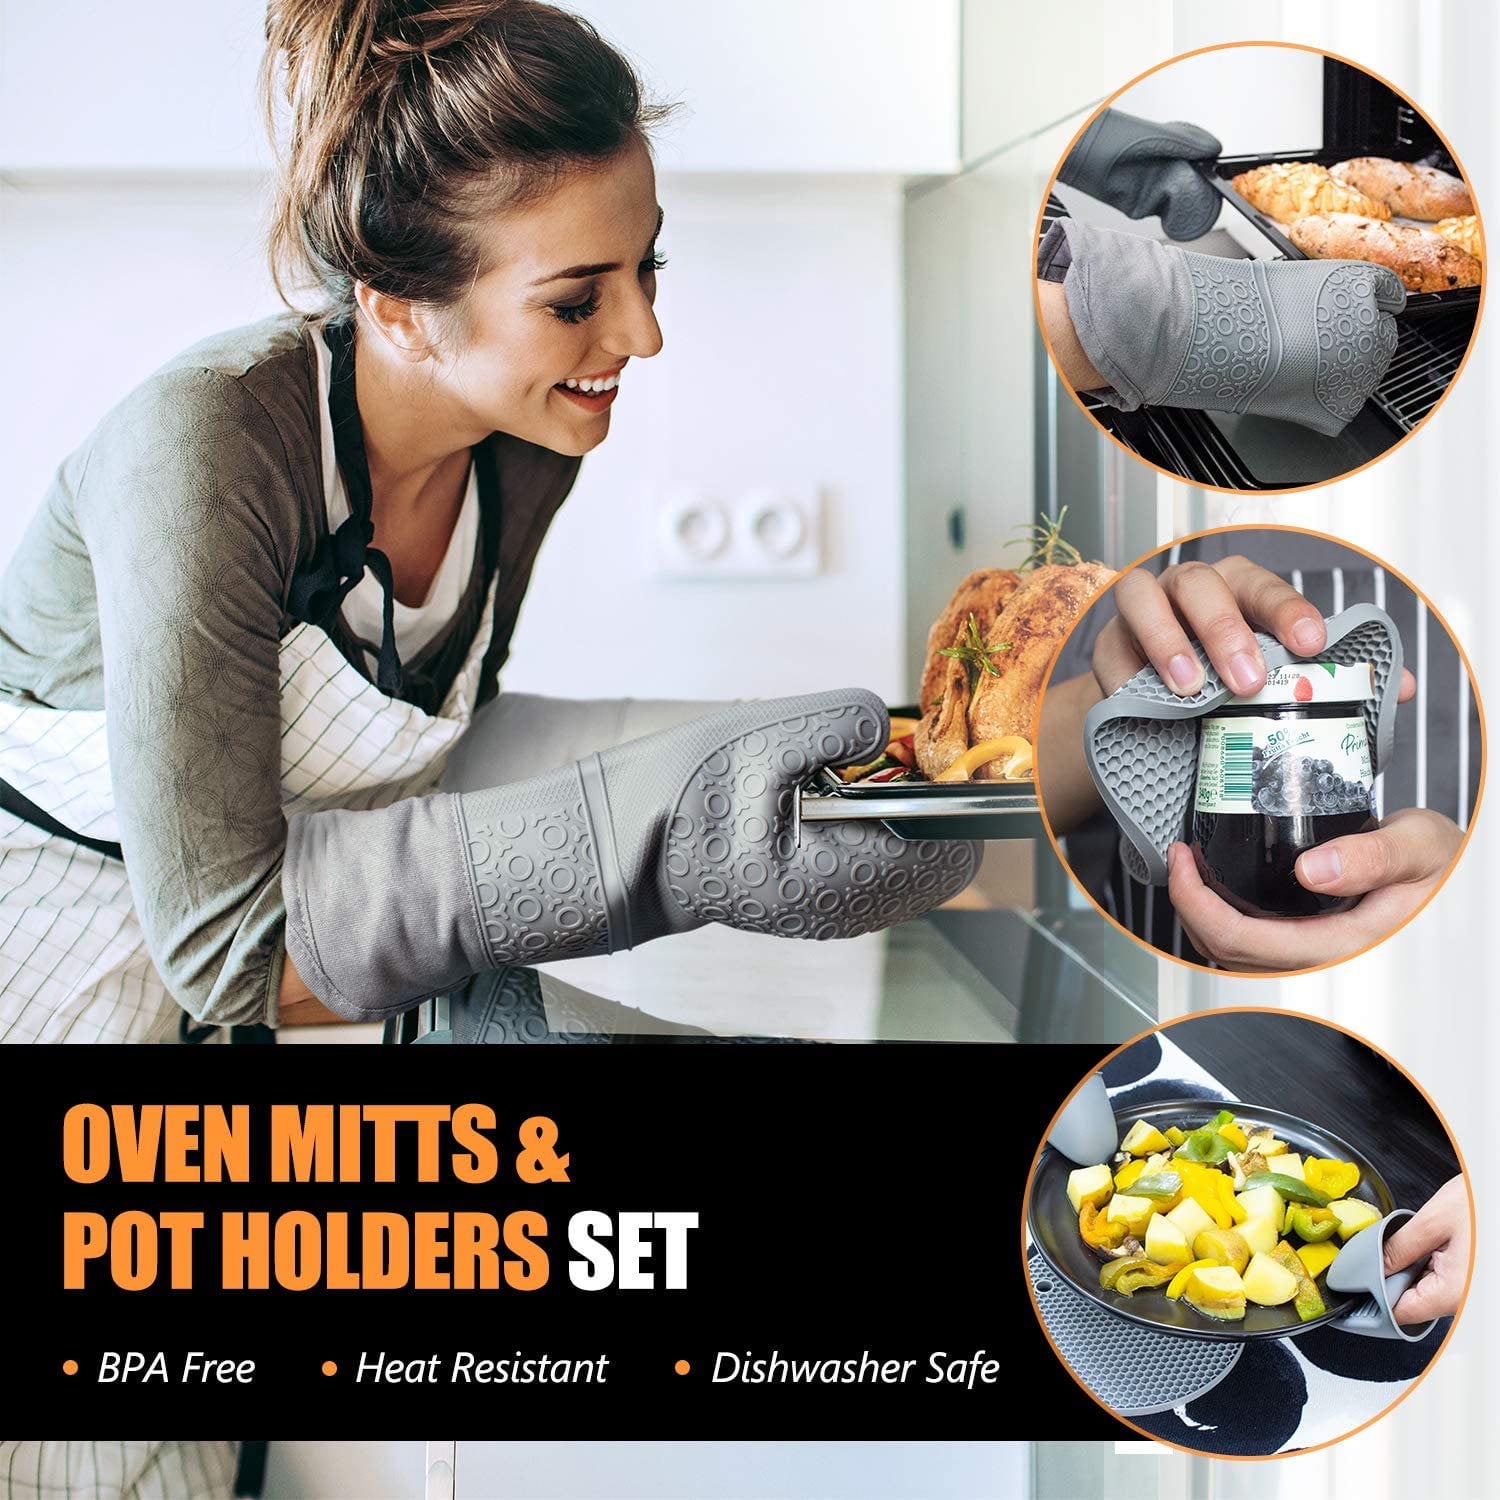 Kitchen Oven Glove High Heat Resistant 500 Degree Extra Long Oven Mitts and  Potholder with Non-Slip Silicone Surface